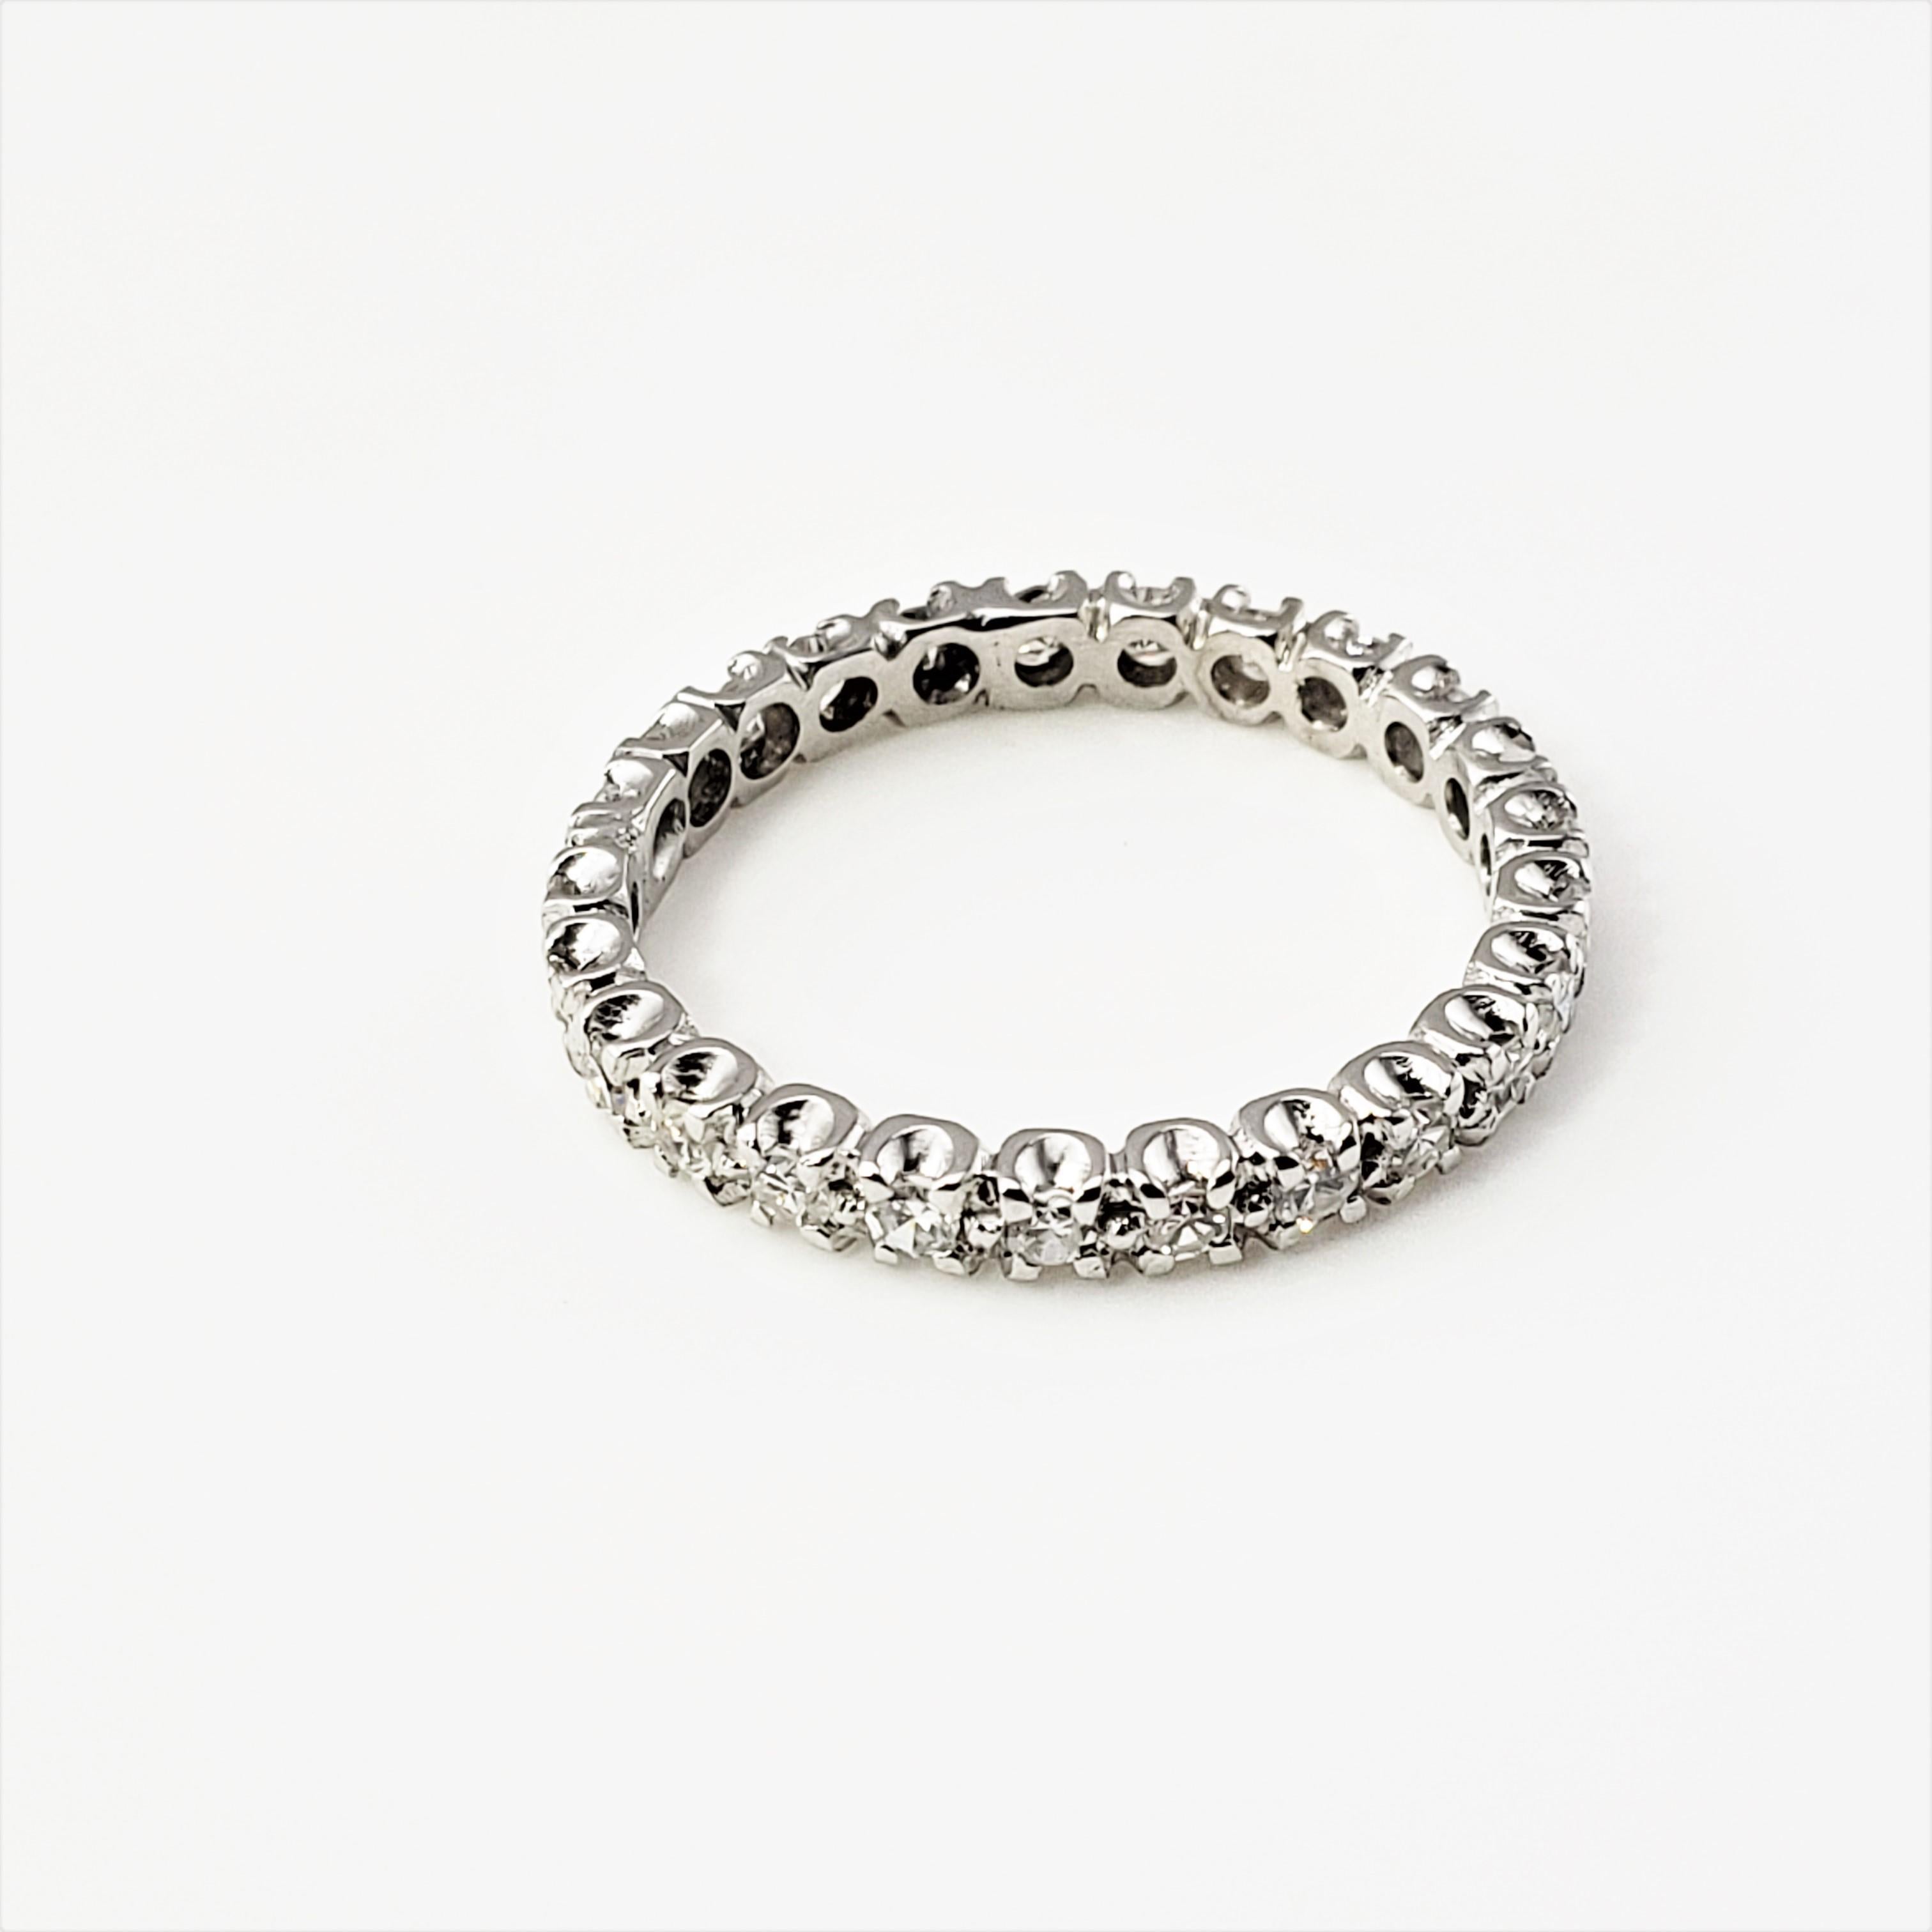 14 Karat White Gold Diamond Eternity Band Size 6.25-

This sparkling eternity band features 25 round single cut diamonds set in classic 14K white gold.  Width:  2.5 mm.

Approximate total diamond weight:  .75 ct.

Diamond color:  G

Diamond clarity: